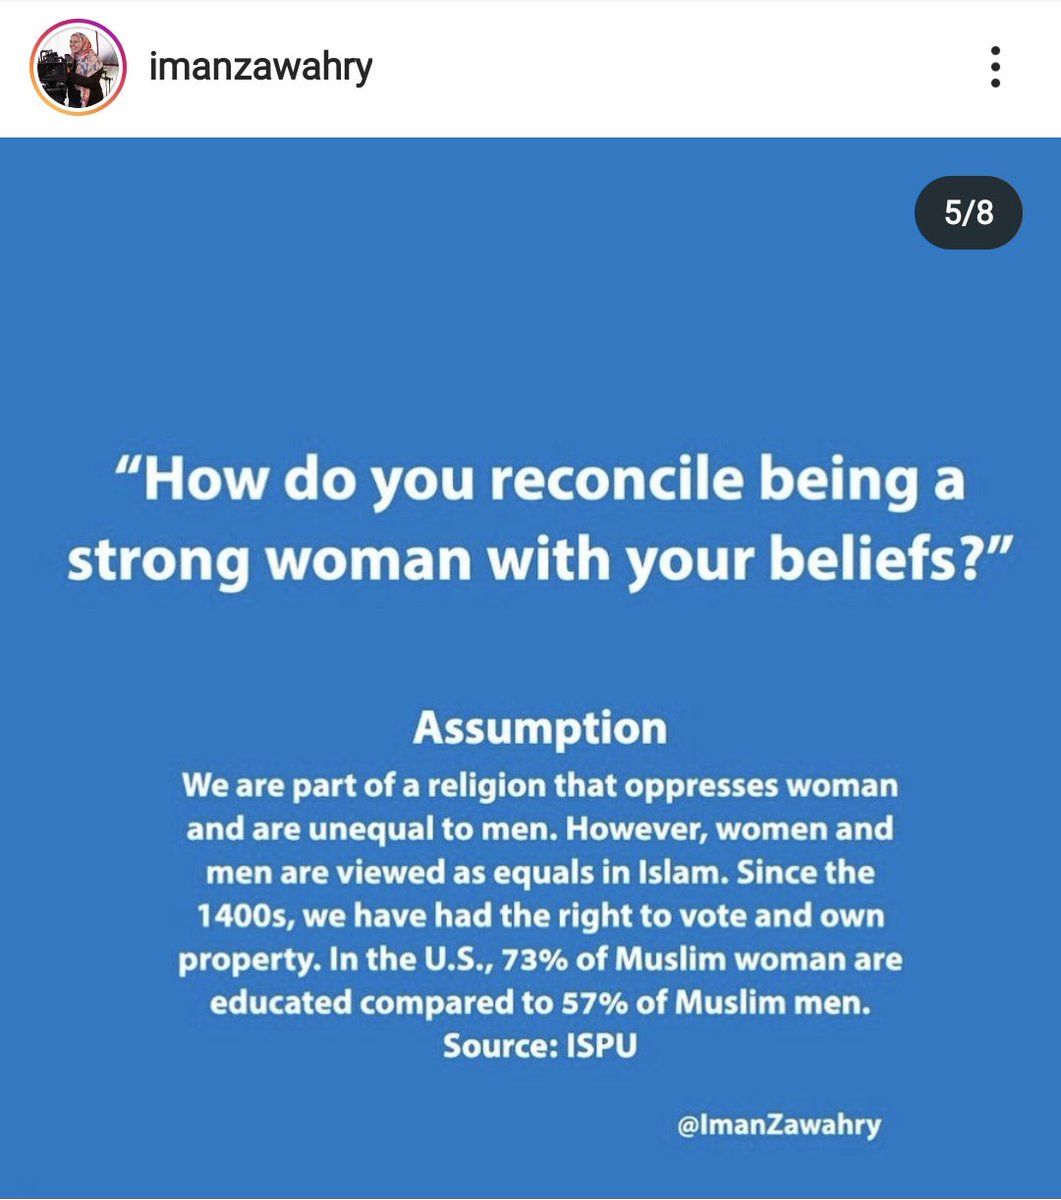 Tying Muslim women to oppression is unfortunately a common ideology. I always wonder if I'm labeled in job interviews and in the workplace and what my role/salary could have potentially reached if I wasn't a Muslim woman.